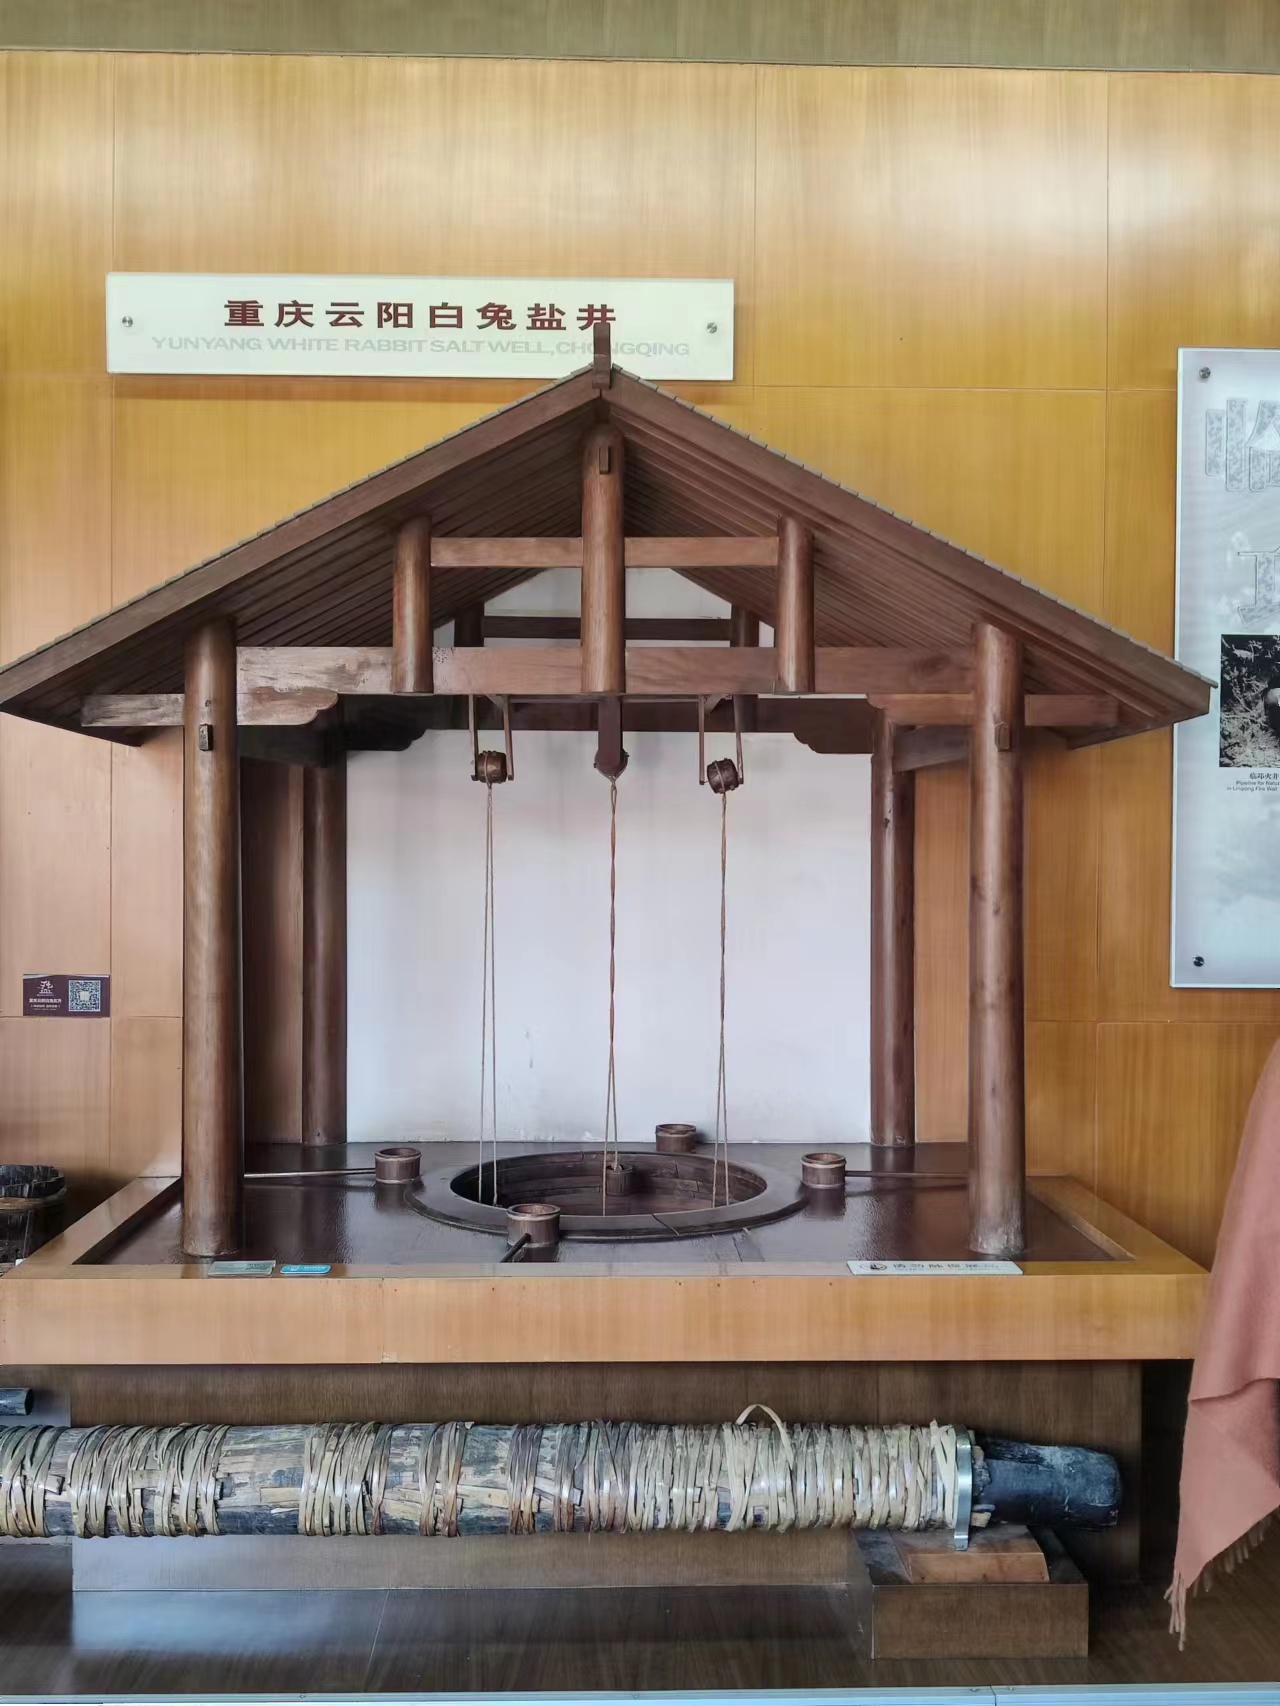 Museum Reflects on History of Well Salt Production in China